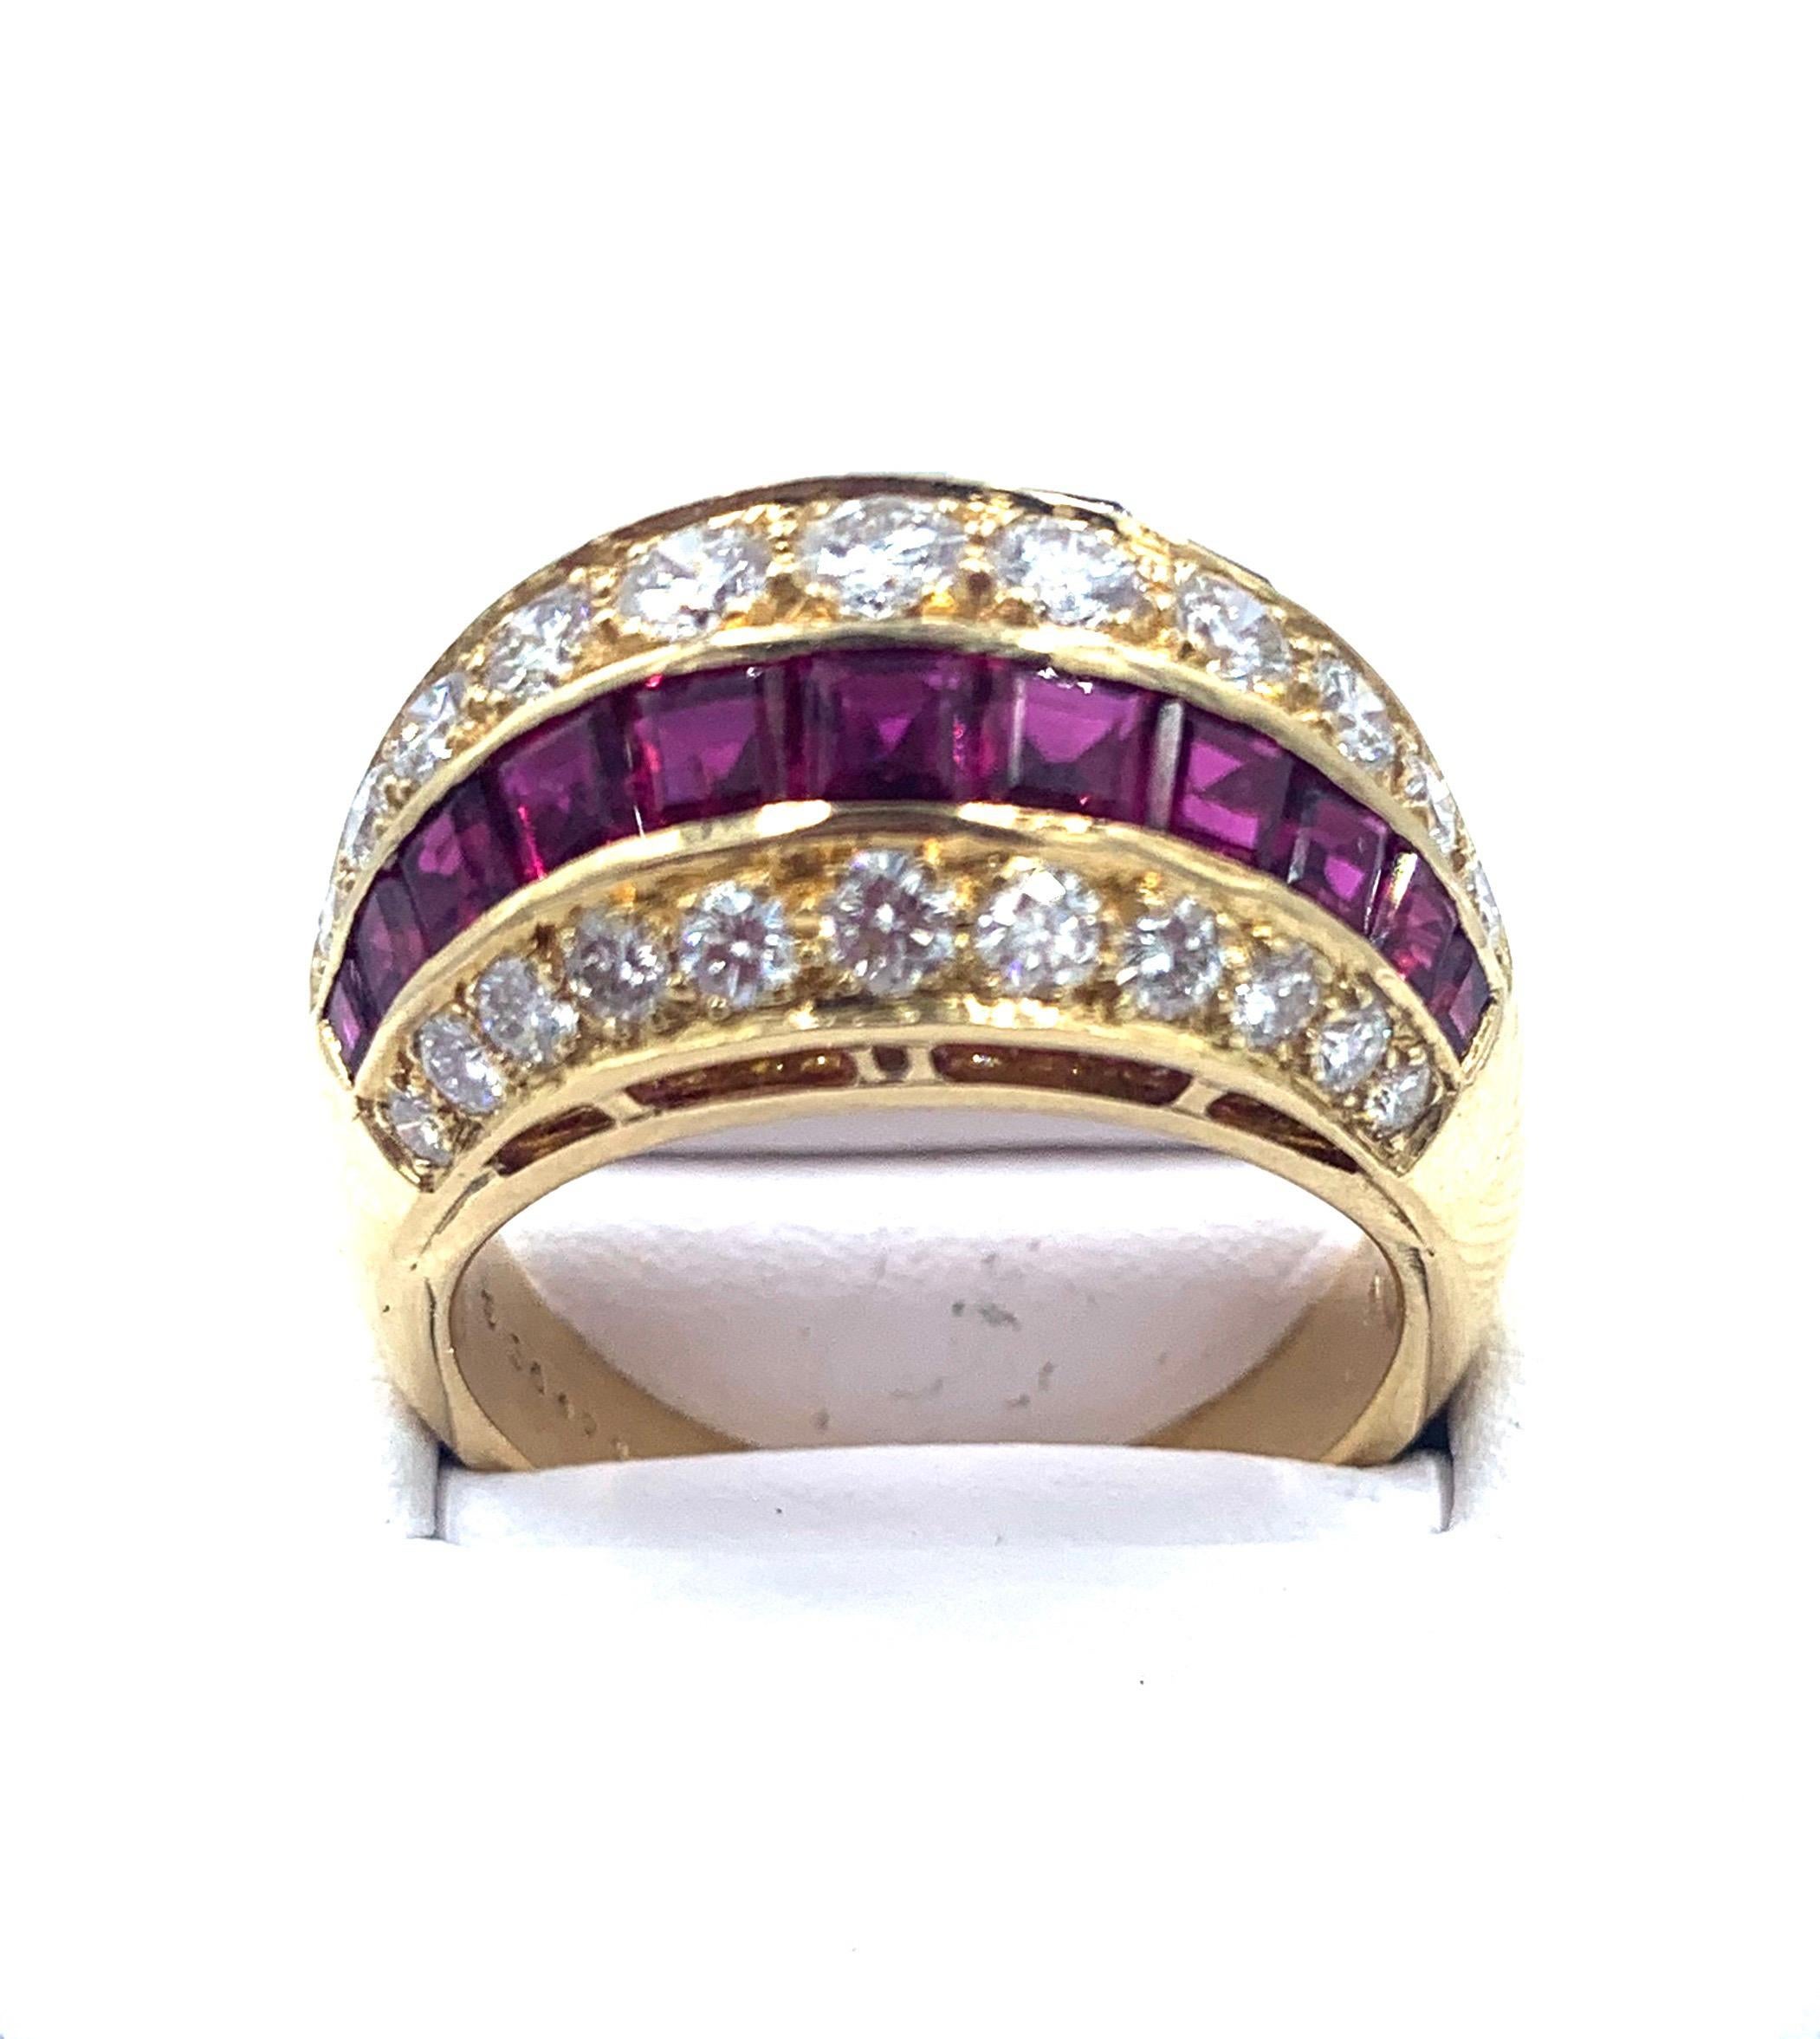 This Stunning Ruby and Diamond Dome Ring is the work of Oscar Heyman, a name known and appreciated by jewelry connoisseurs around the world. This beautiful dome-style ring features three rows of bright set diamonds weighing 1.87cts and two rows of